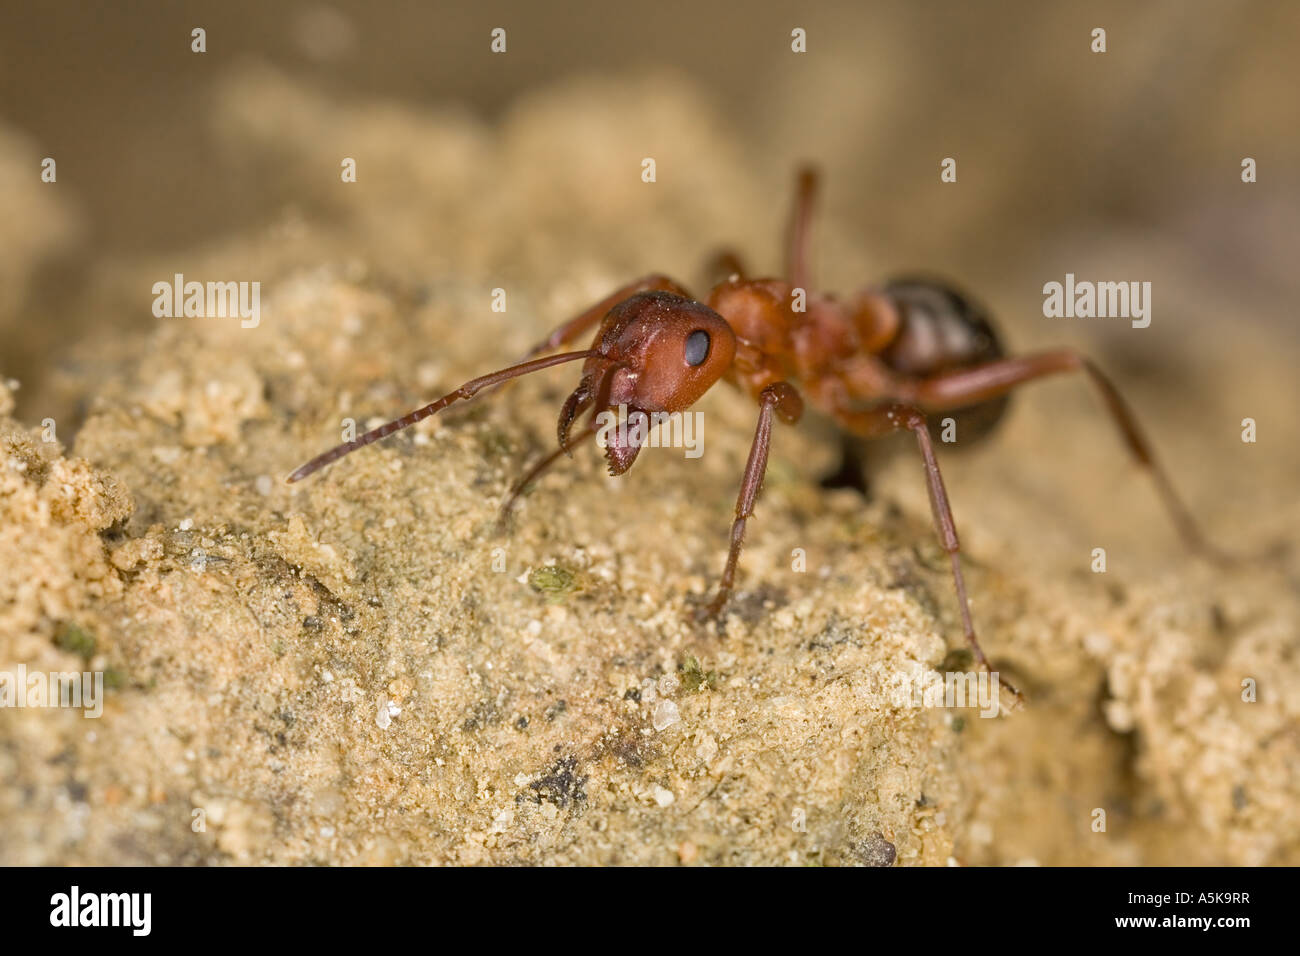 Southern wood ant (Formica rufa) Stock Photo